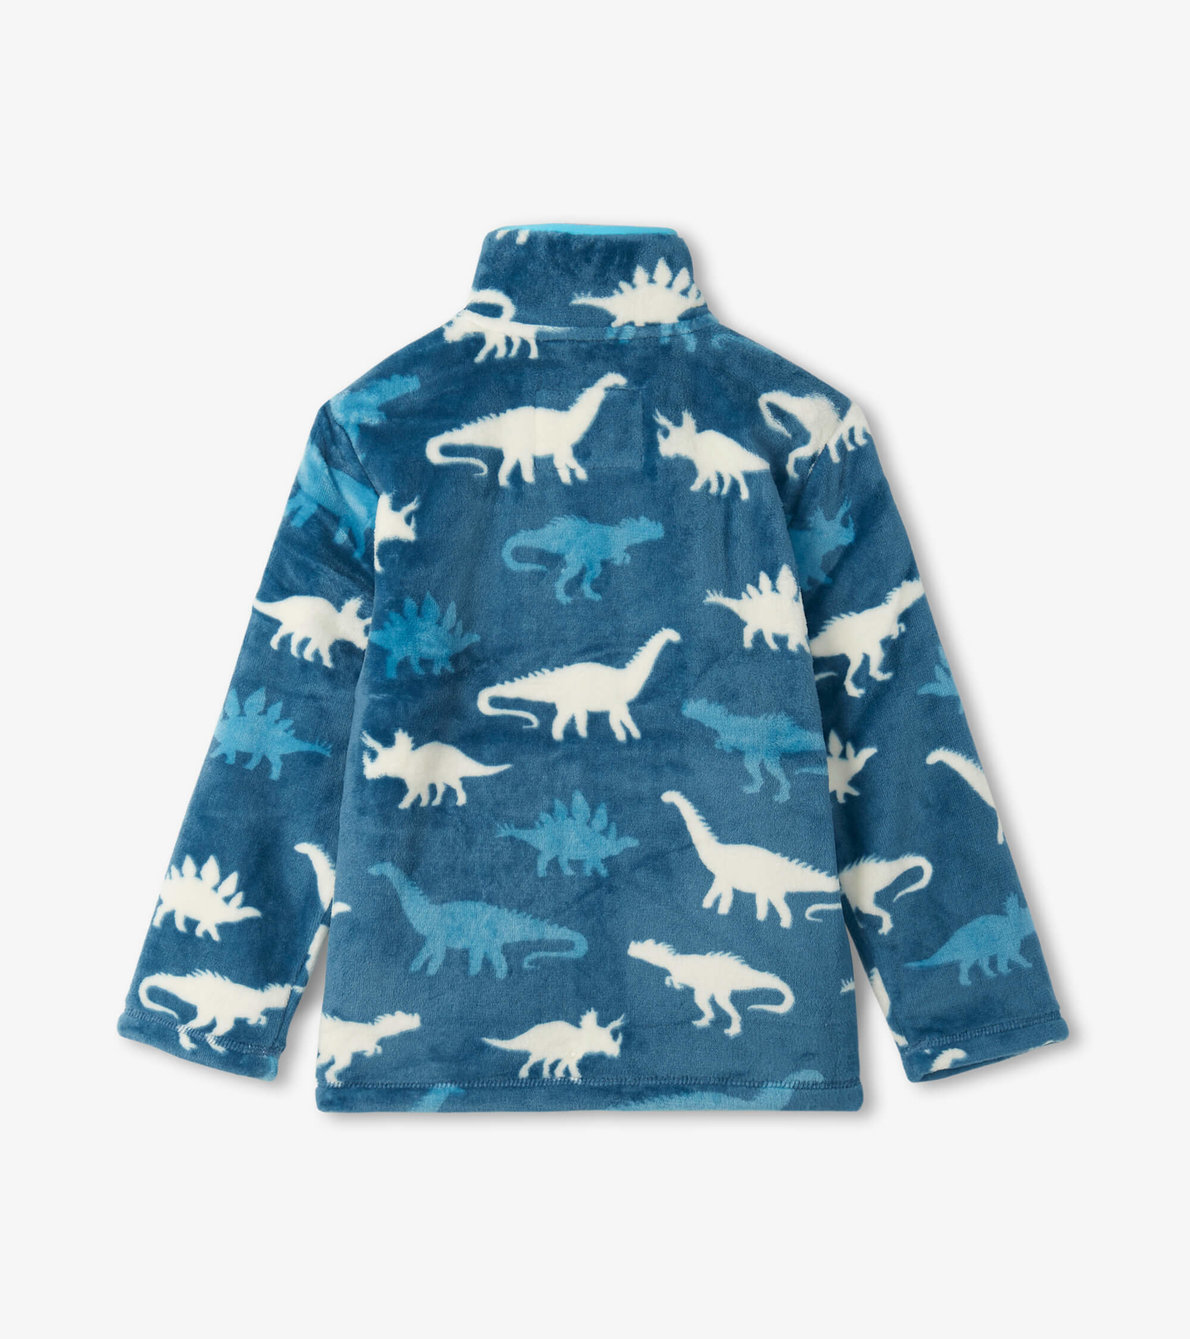 View larger image of Dino Silhouettes Fuzzy Fleece Zip Up